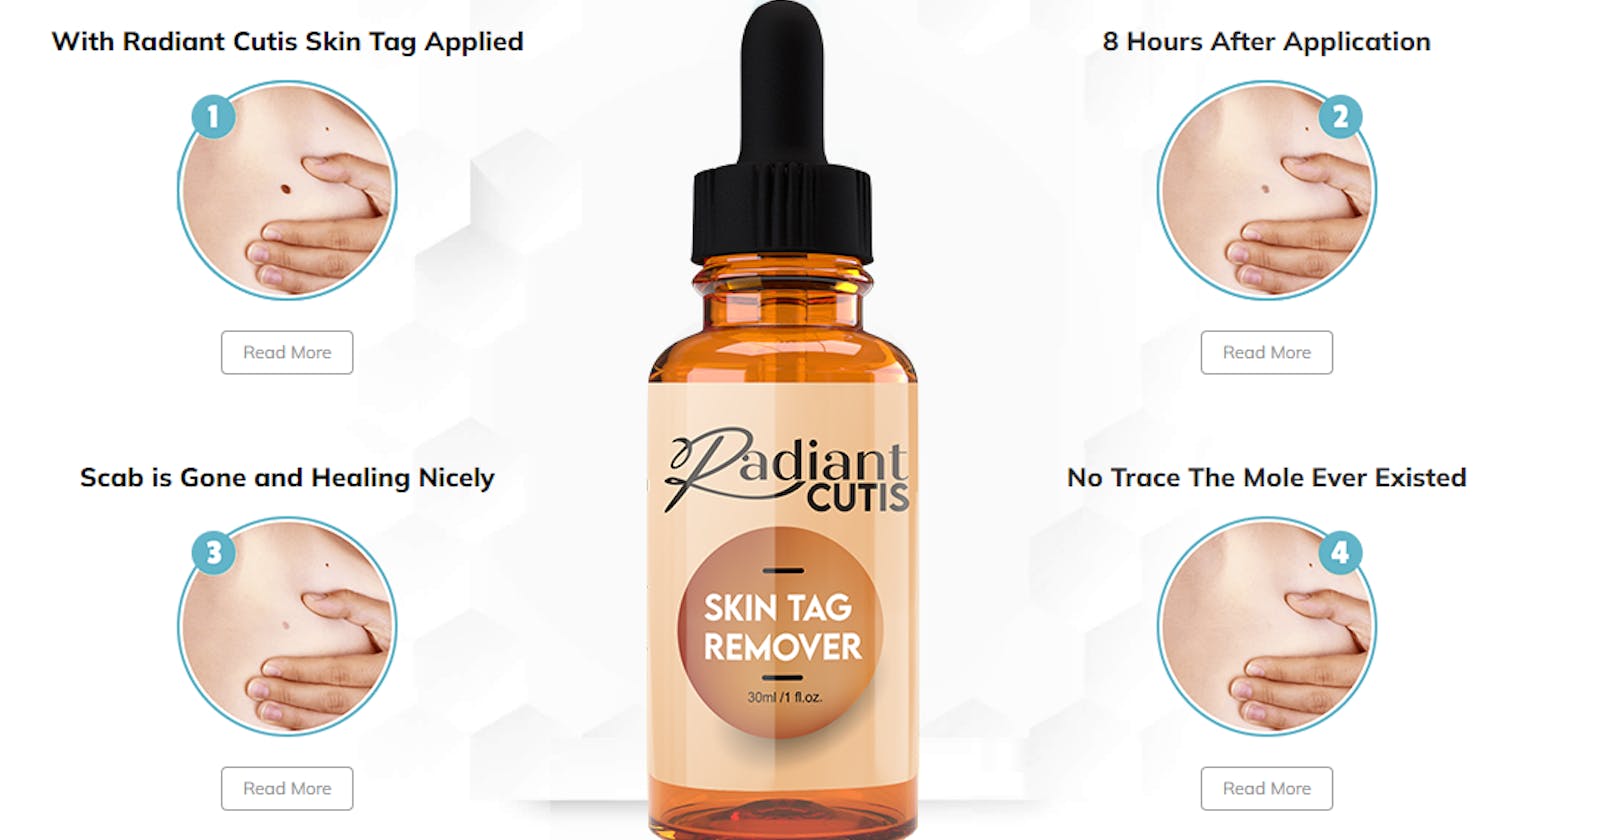 Radiant Cutis Skin Tag Remover: The Safe and Easy Way to Remove Skin Tags!